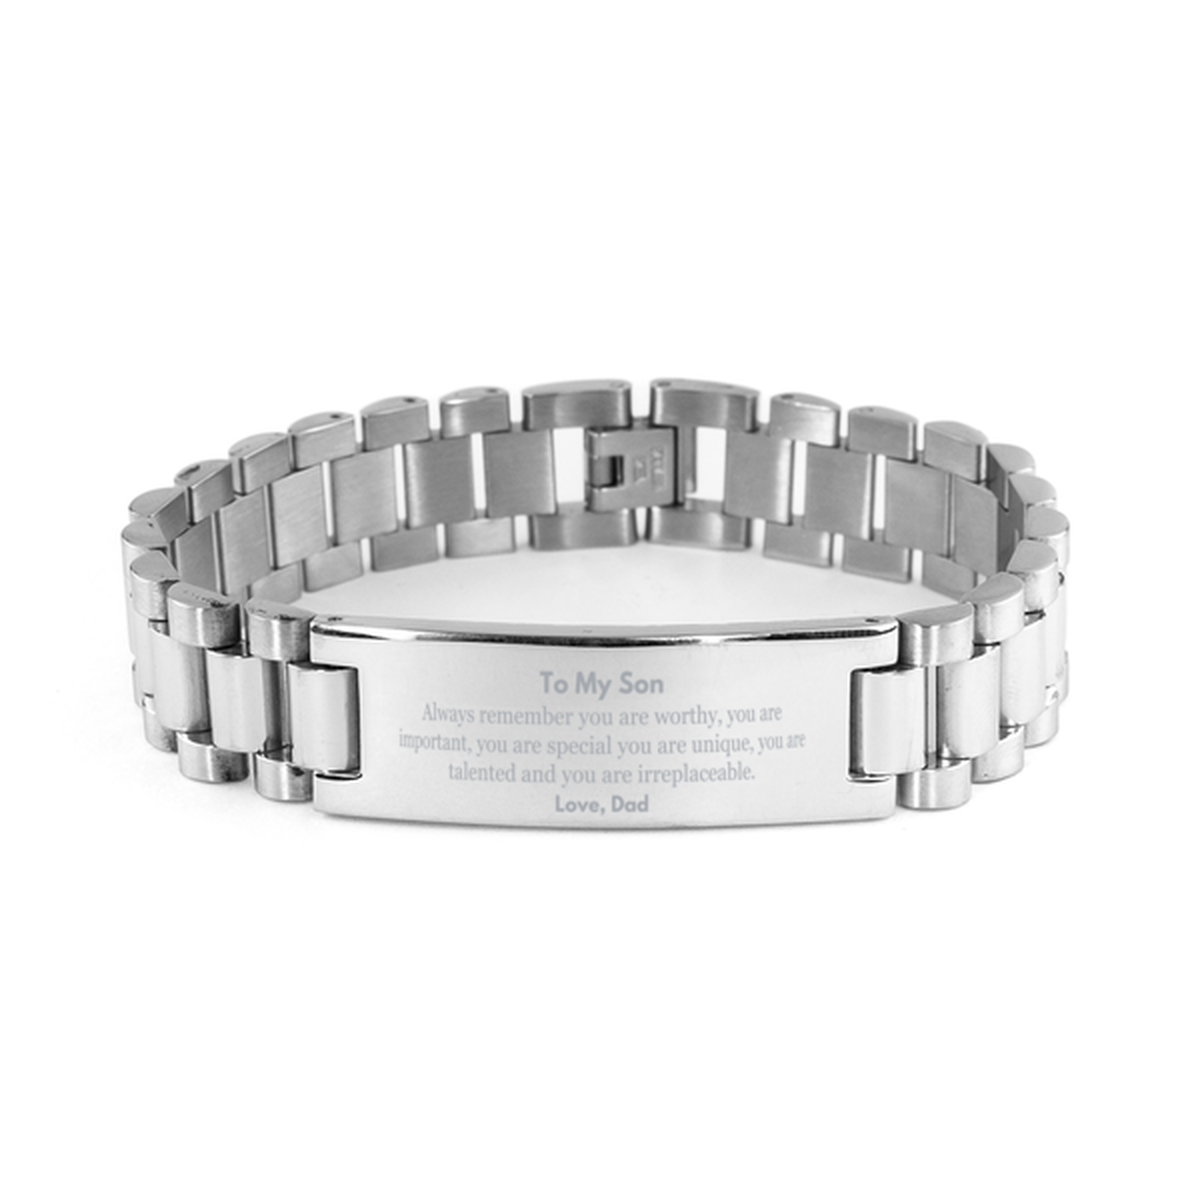 Son Birthday Gifts from Dad, Inspirational Ladder Stainless Steel Bracelet for Son Christmas Graduation Gifts for Son Always remember you are worthy, you are important. Love, Dad